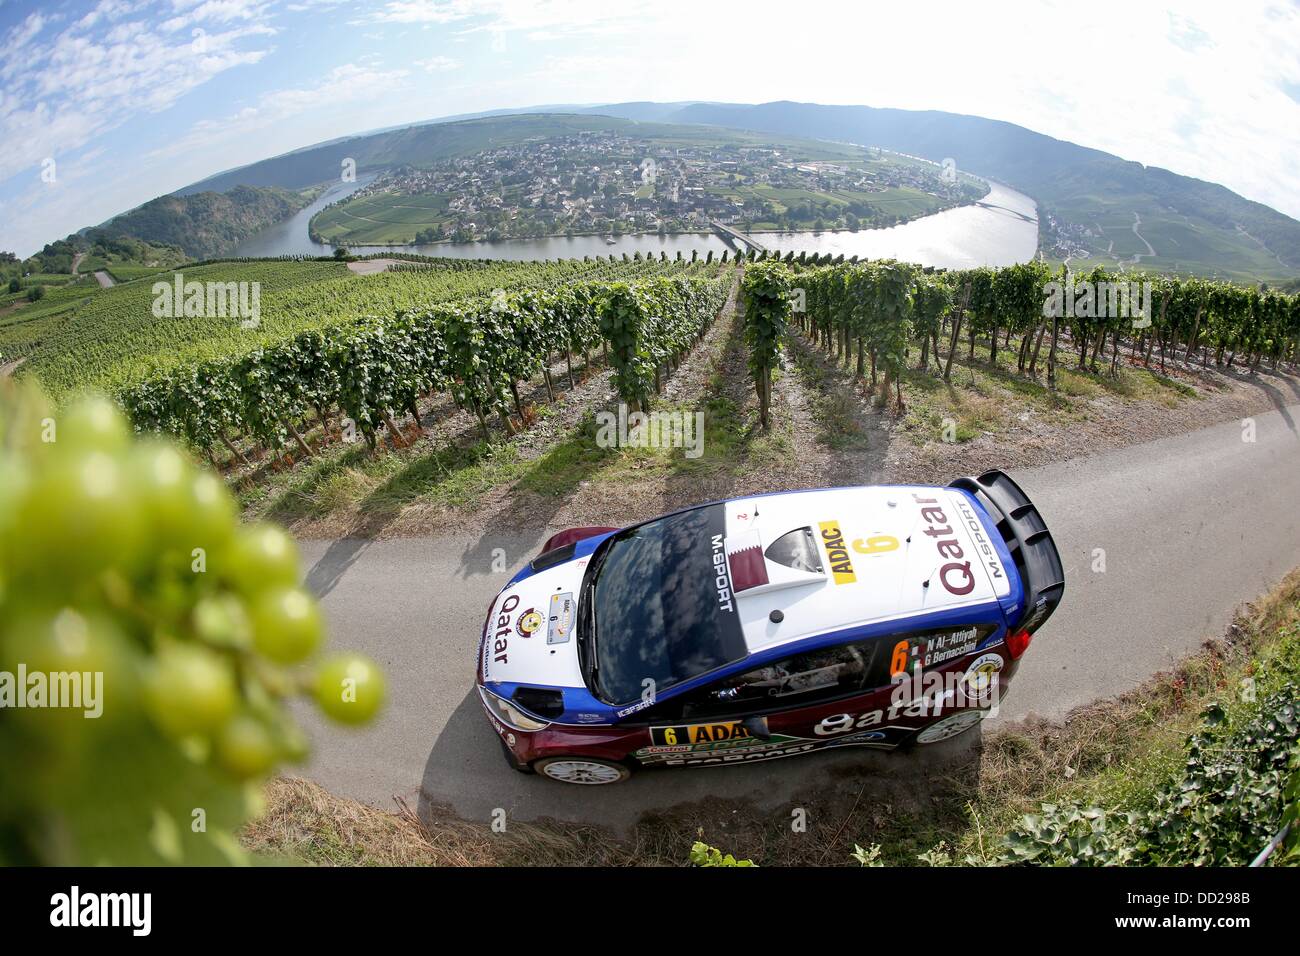 Piesport, Germany. 23rd Aug, 2013. Qatar-born rallye pilot Nasser Al-Attiya and his Italian co-pilot Giovanni Bernacchini drive through the vineyards during the fourth competition of the ADAC Rallye Deutschland, which is part of the FIA World Rally Championship, near Piesport, Germany, 23 August 2013. Photo: THOMAS FREY/dpa/Alamy Live News Stock Photo